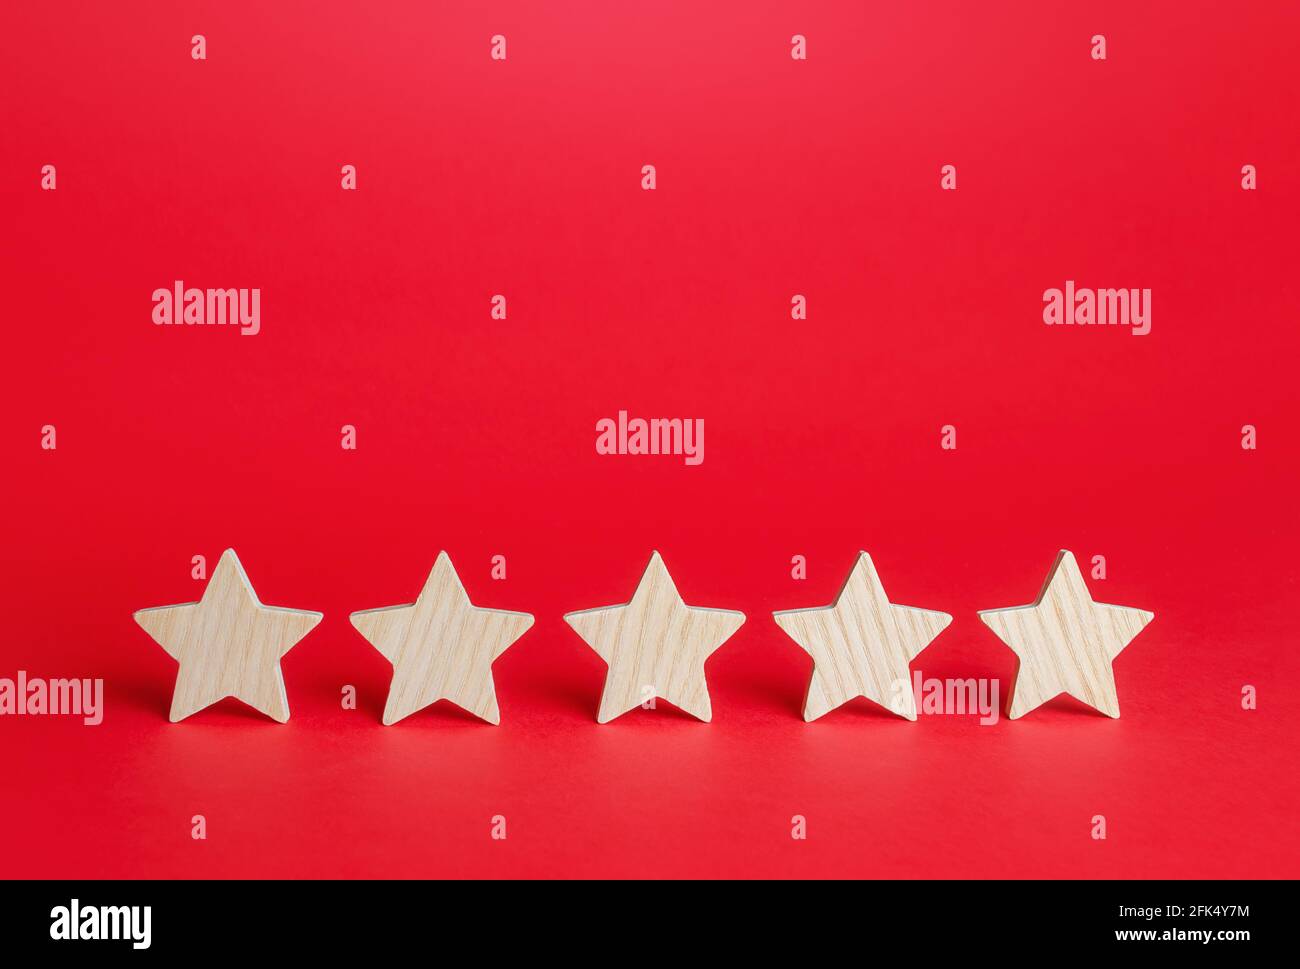 Five stars on a red background. Rating evaluation concept. Service quality feedback. High satisfaction. Good reputation. Popularity rating of restaura Stock Photo